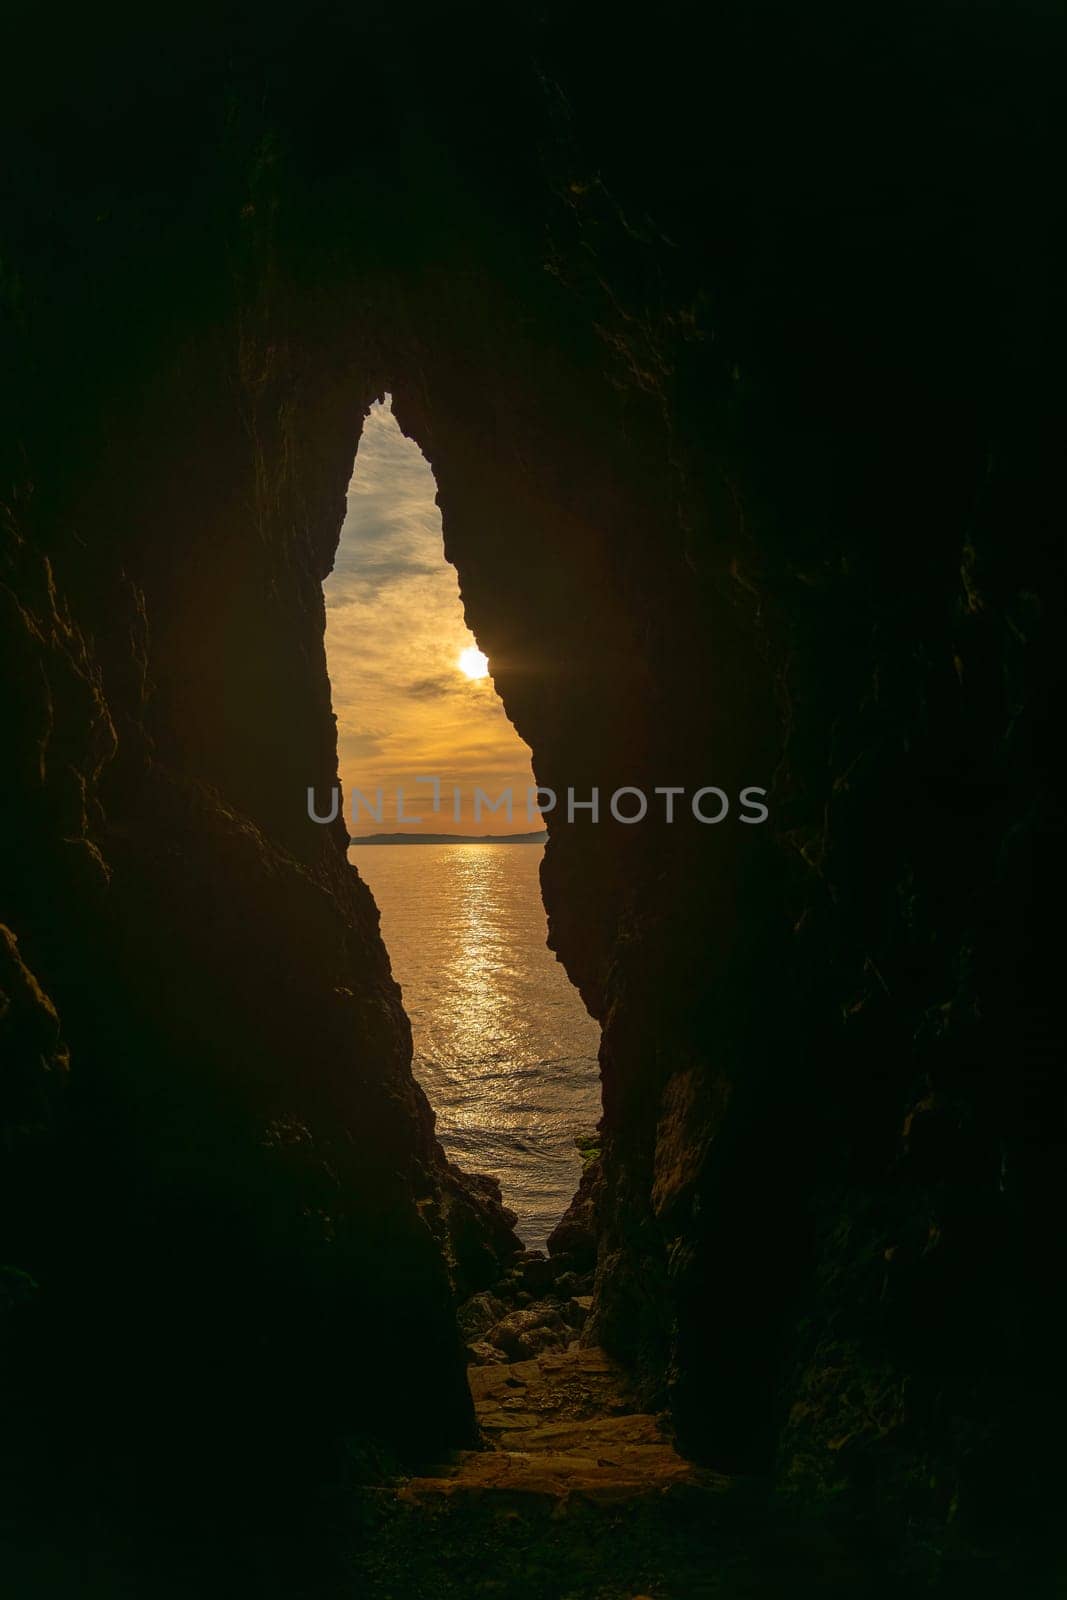 A cave with a small opening in it and the sun shining through it. The sun is setting and the water is calm. by Matiunina